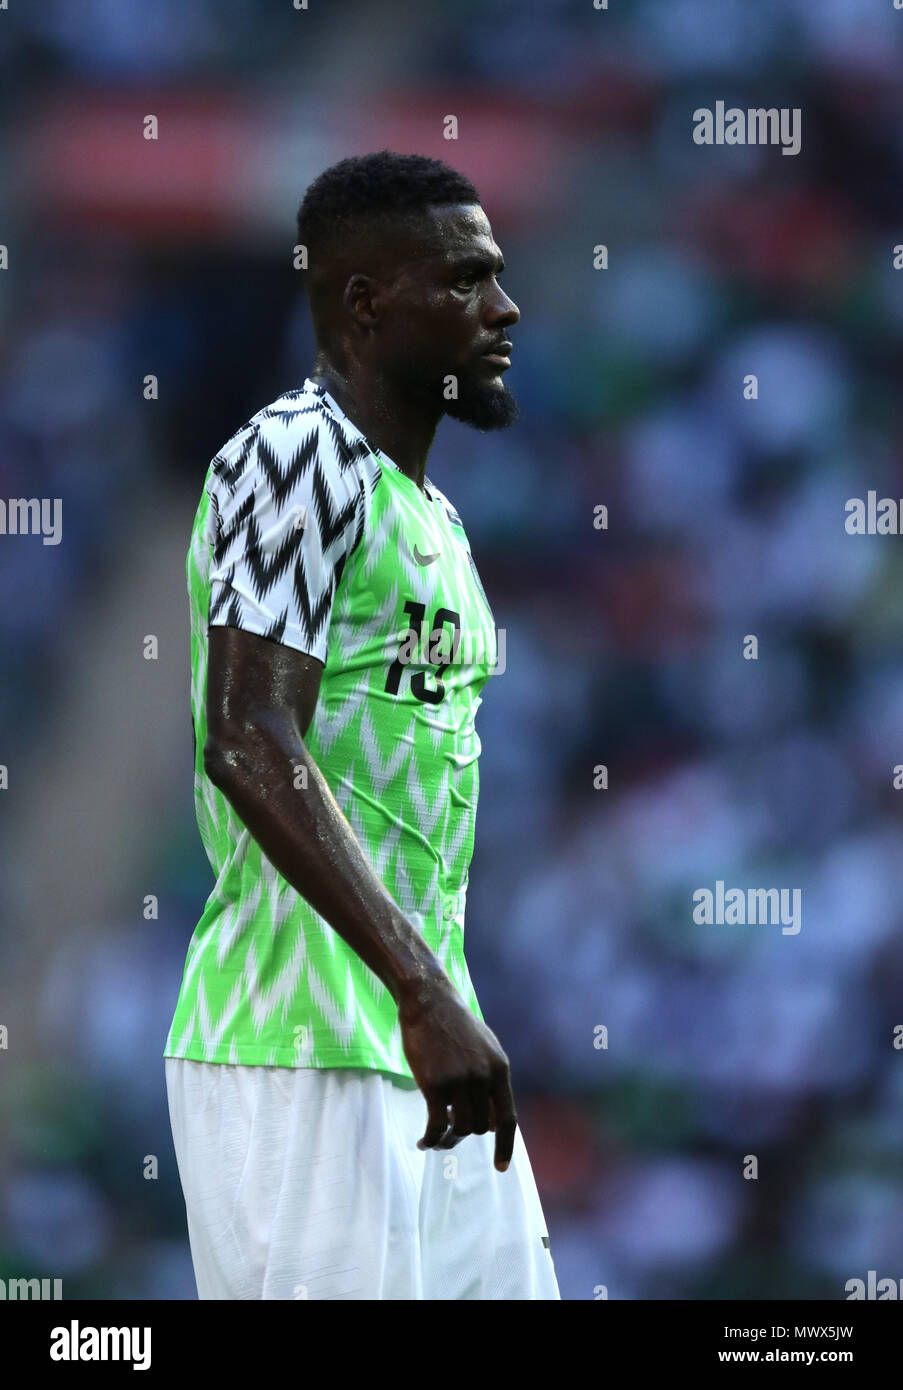 London, UK. 2nd June 2018.John Ogu (N) at the England v Nigeria Friendly International match, at Wembley Stadium, on June 2, 2018. **This picture is for editorial use only** Credit: Paul Marriott/Alamy Live News Stock Photo